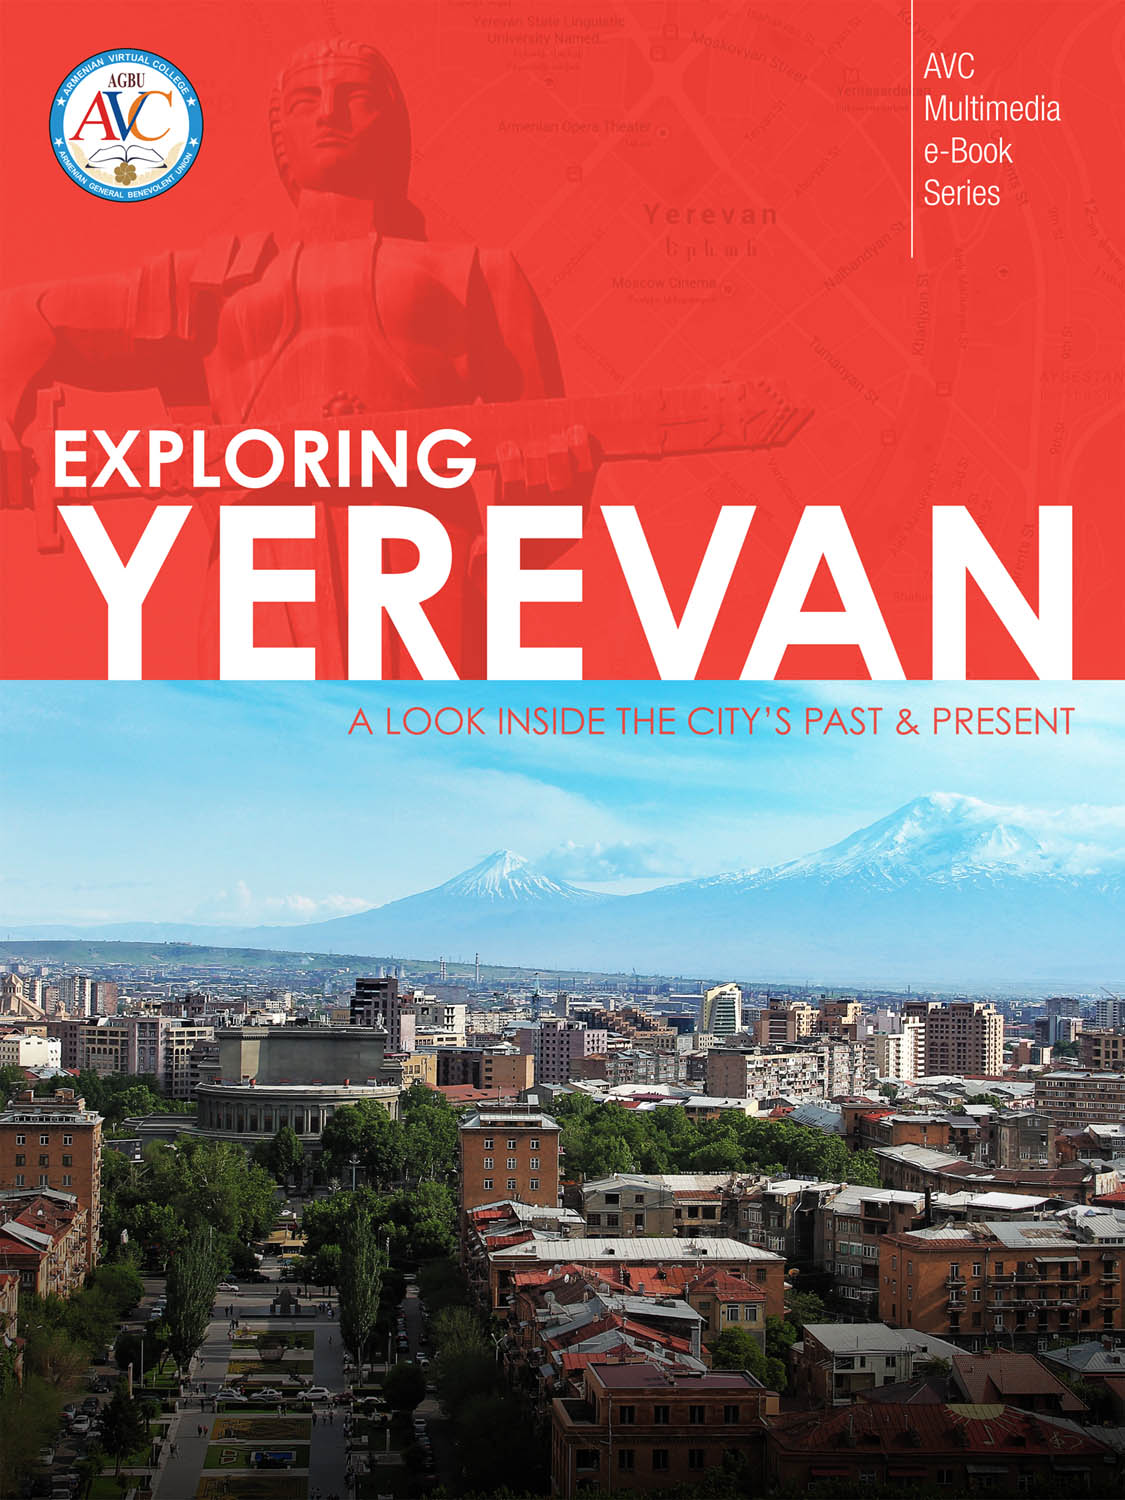 ‘Exploring Yerevan: A Look Inside the City’s Past & Present’ is the second in AGBU AVC’s pioneering multimedia e-book series.